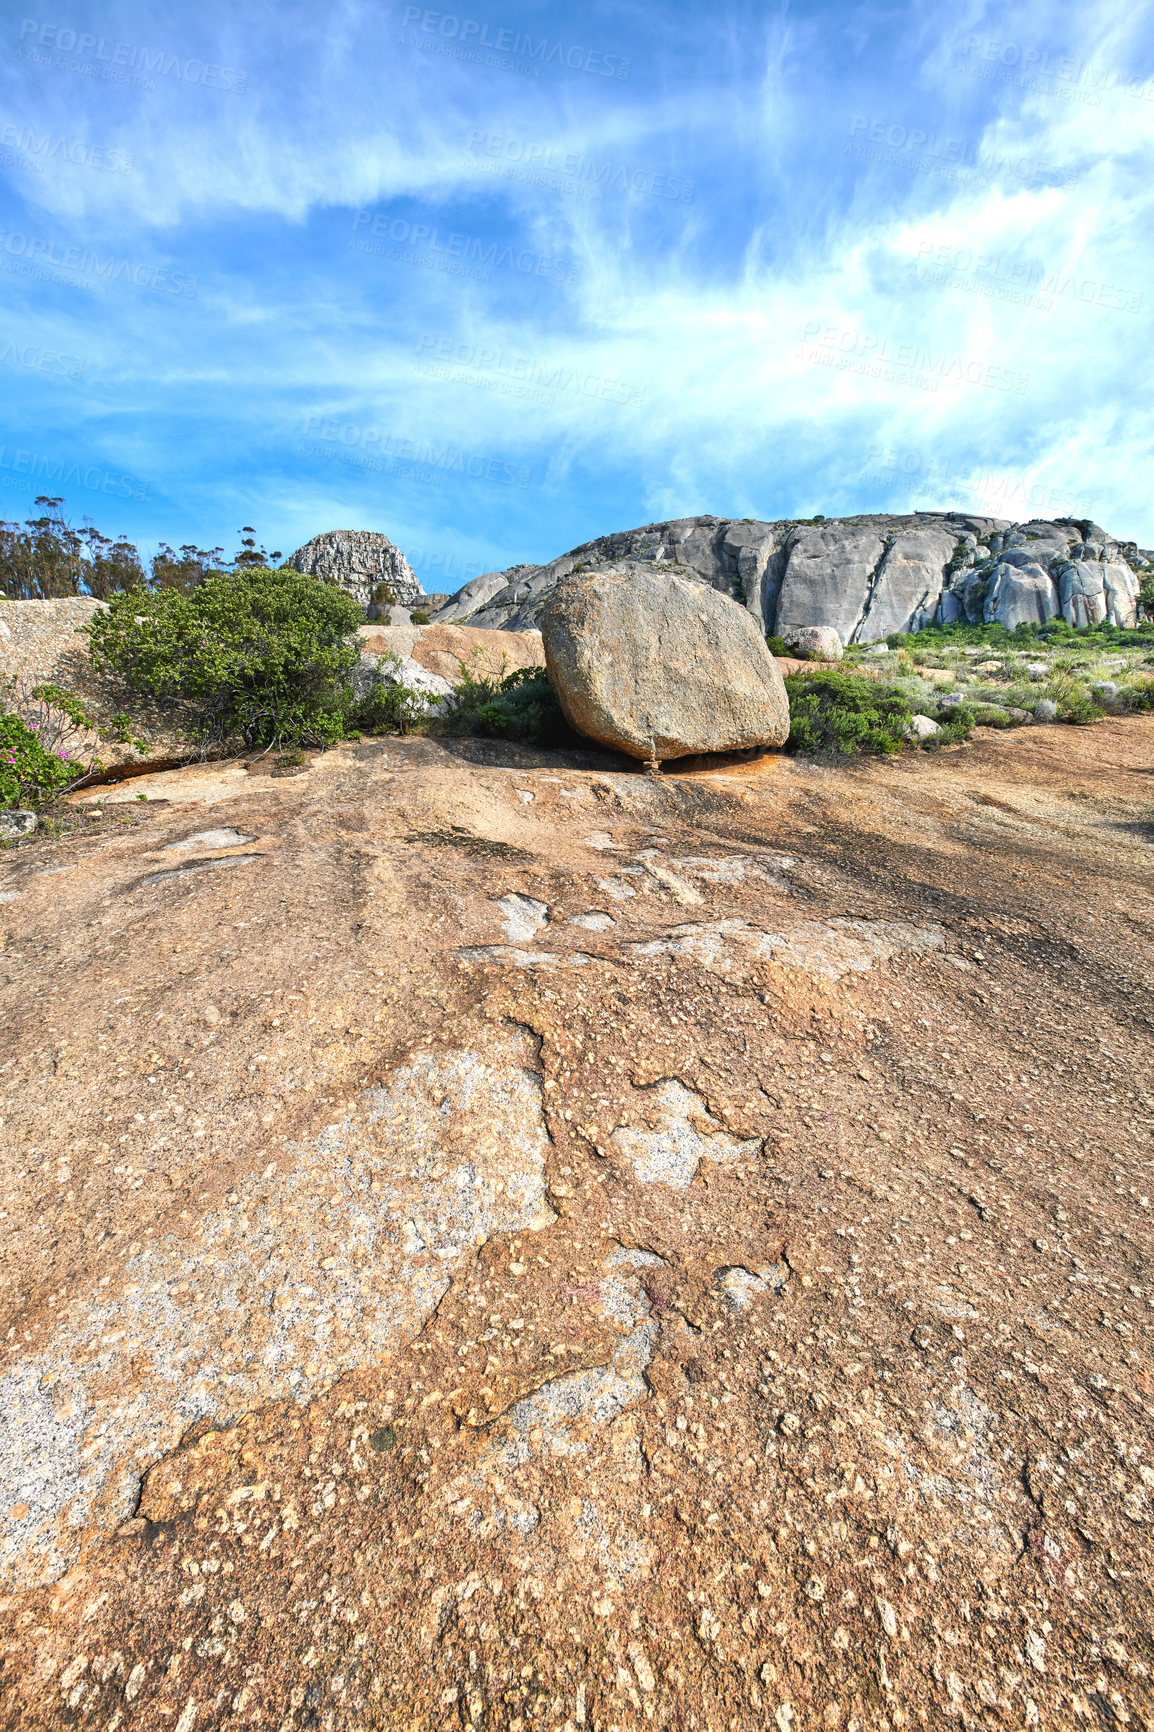 Buy stock photo Closeup of large rocks or boulders and shrubs near the mountains with a cloudy blue sky copyspace. Big stone structures on Table mountain. Famous tourist attraction and hiking trail in Cape Town